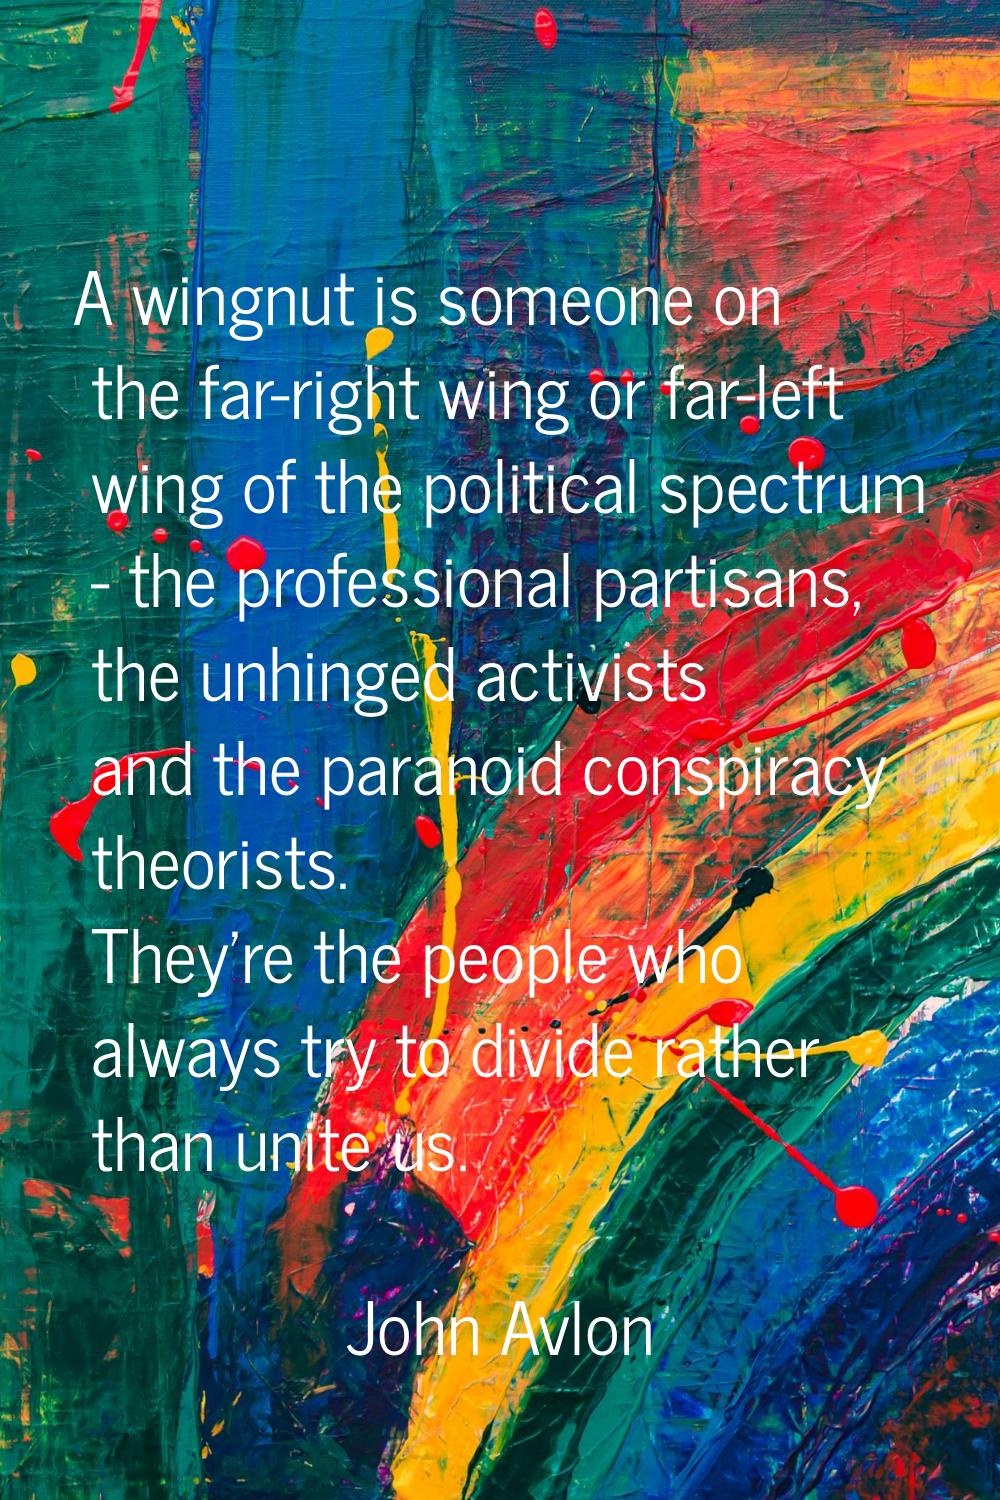 A wingnut is someone on the far-right wing or far-left wing of the political spectrum - the profess